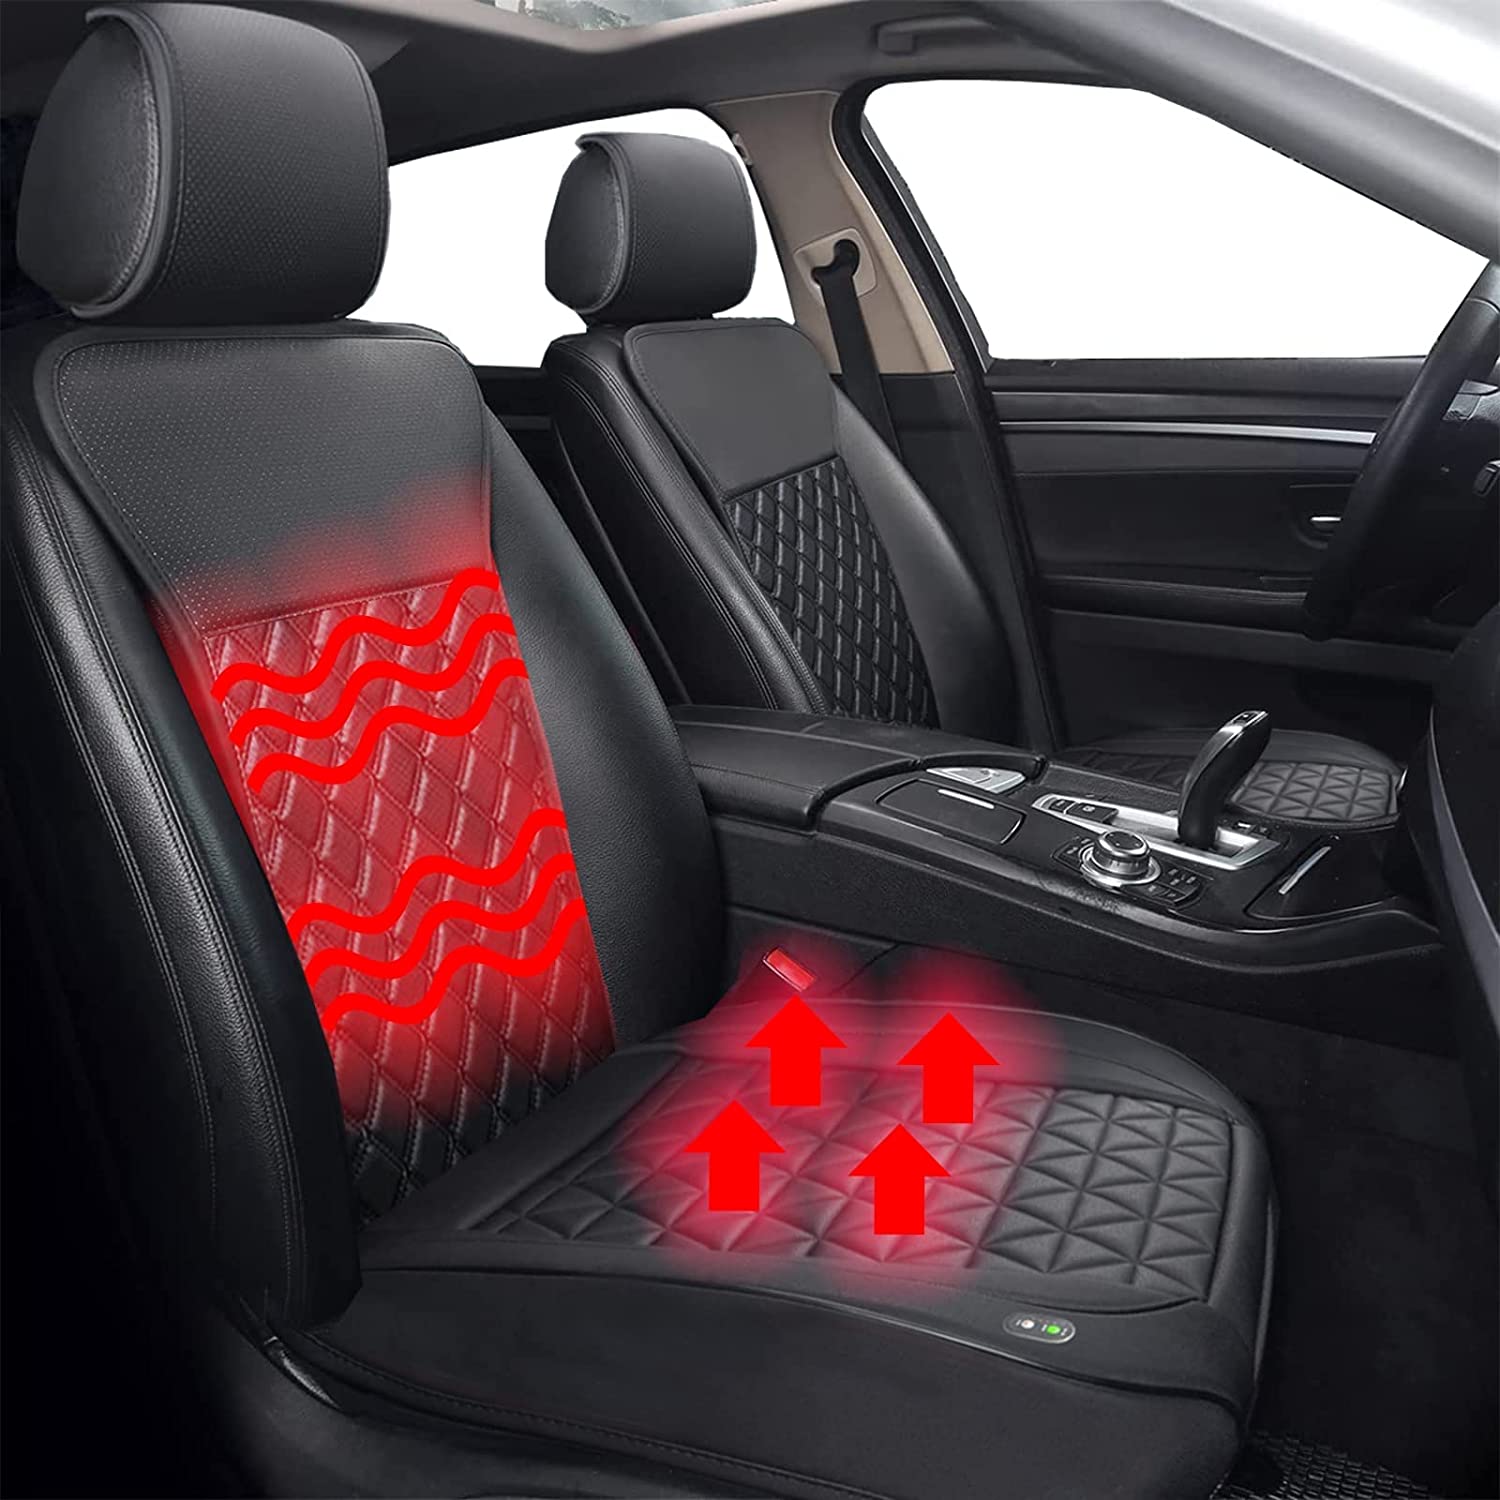 Heated Car Seat Cover with Fast-Heating Technology – HelloMynt